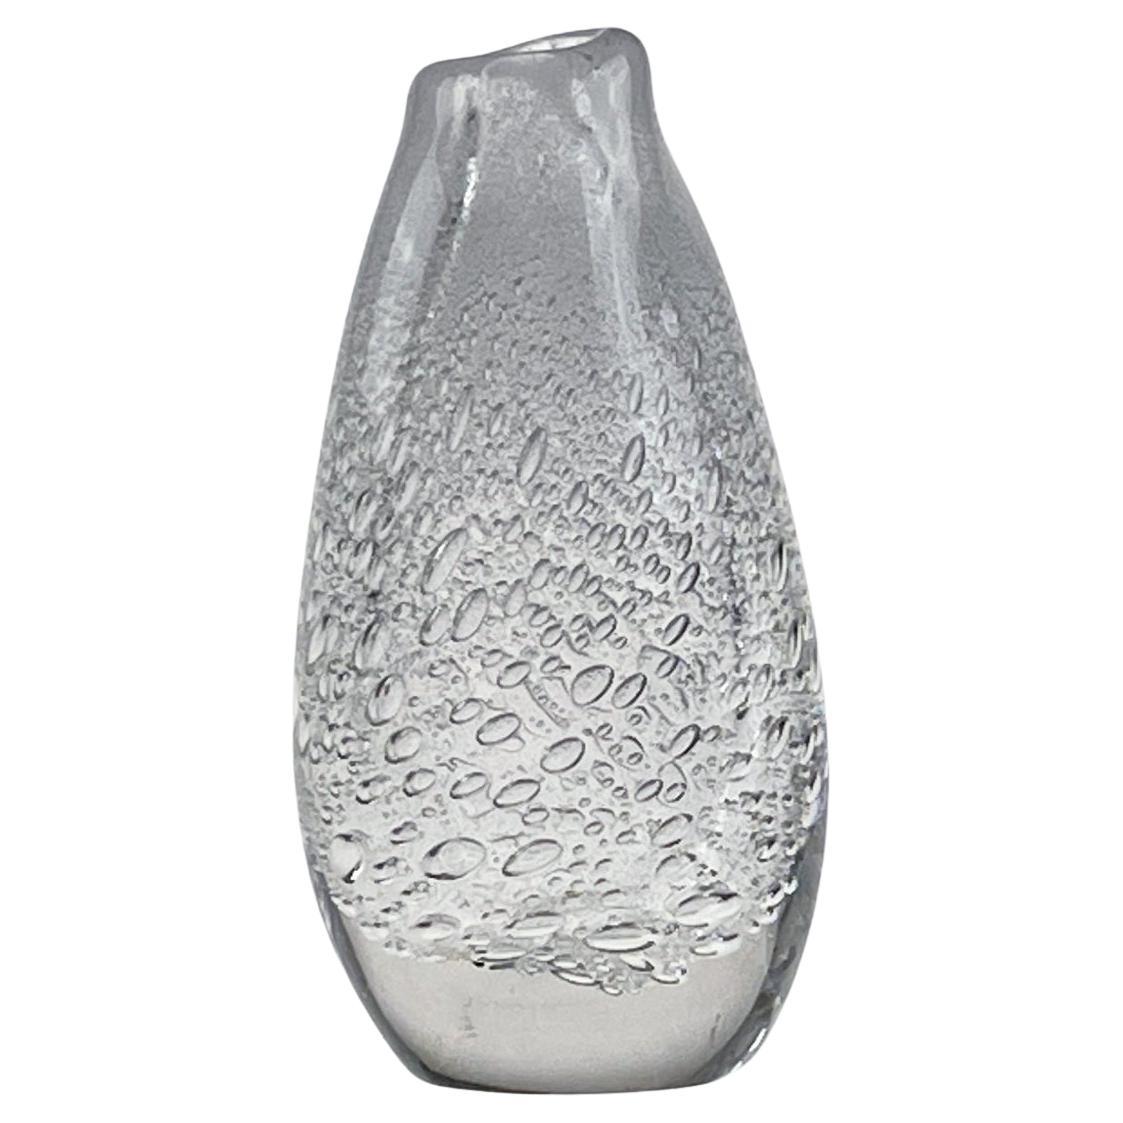 Tapio Wirkkala - Crystal Art-Object with sodium bubbles, model 3234 - Iittala, Finland circa 1948.

In 1947, Finnish designer Tapio Wirkkala created a stunning art-object that would become a sought-after piece for collectors and enthusiasts of